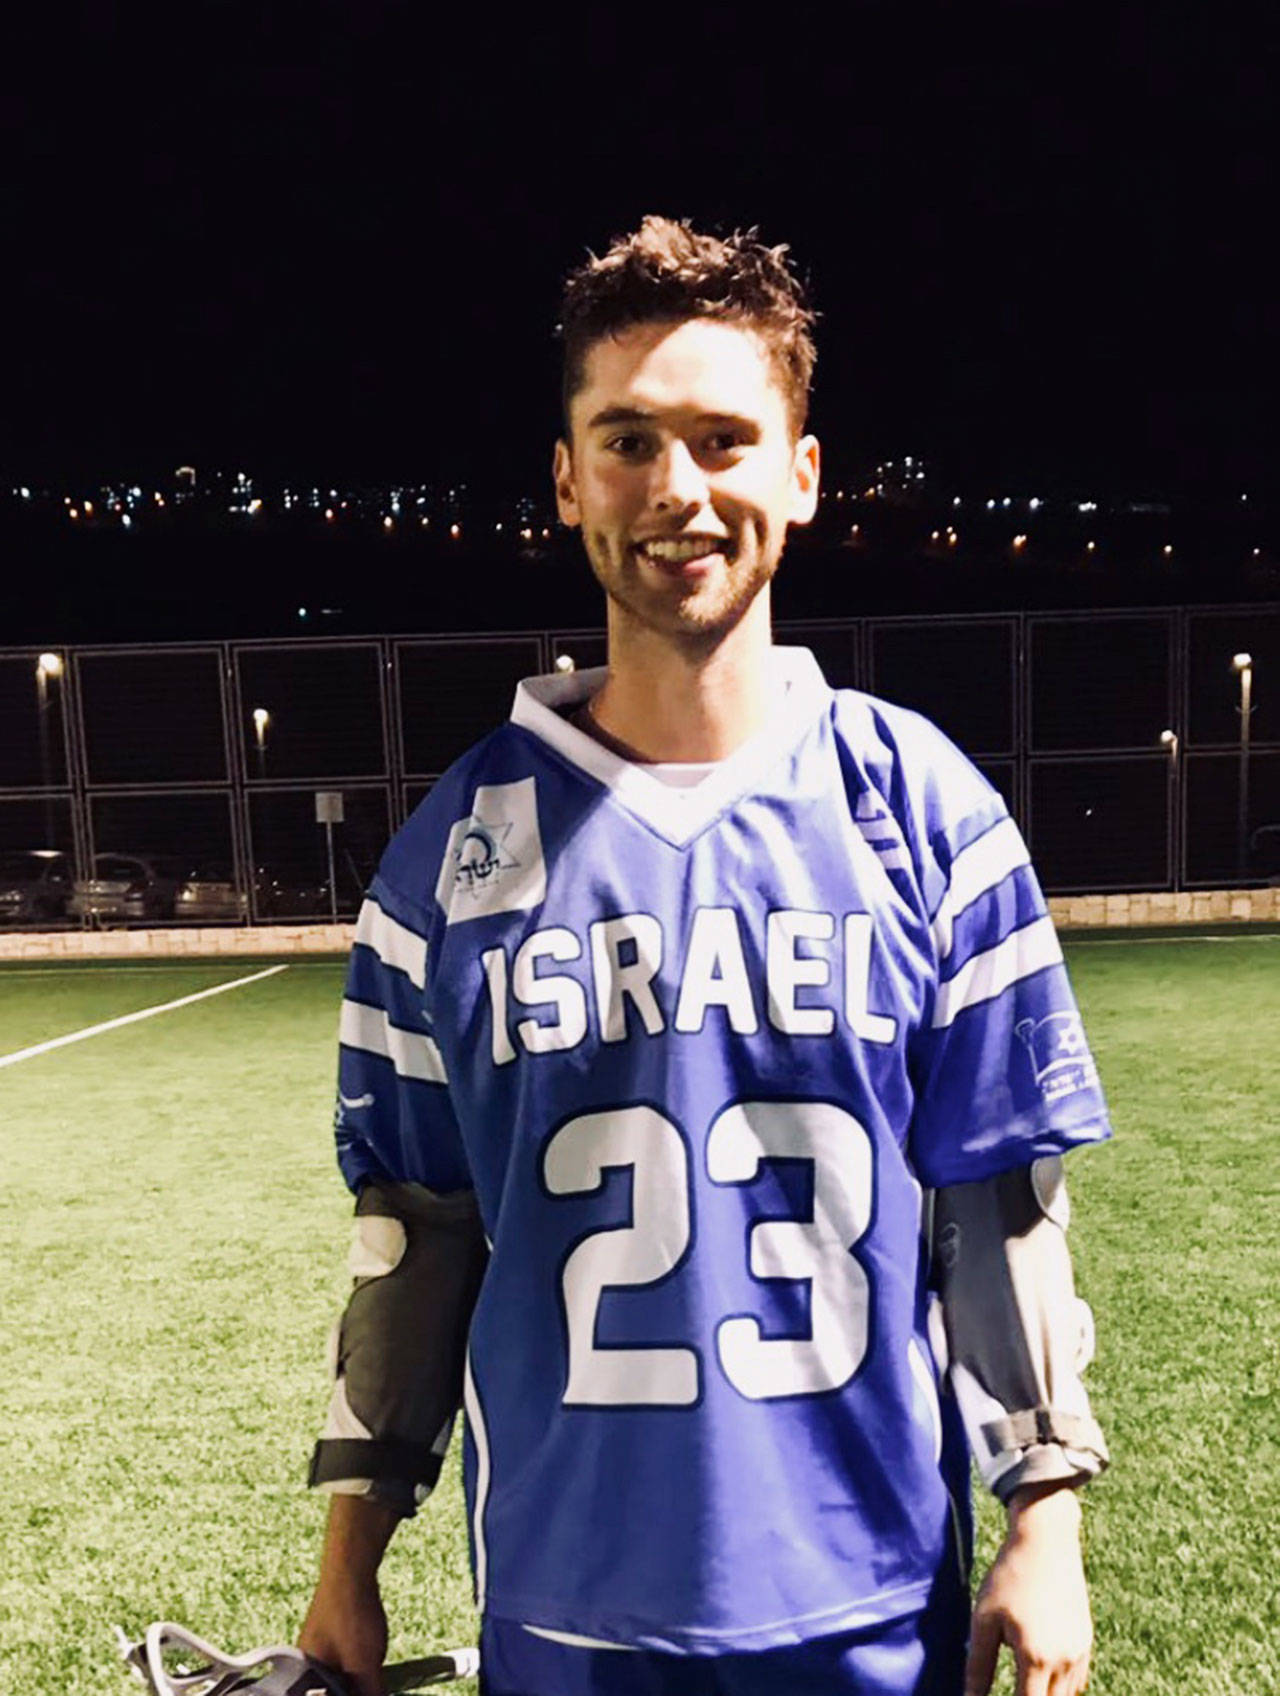 Photo courtesy of Alexander Rabin | Former Bainbridge High School lacrosse standout Alexander Rabin recently represented Israel when the country’s national team competed in the Federation of International Lacrosse Men’s World Championship.